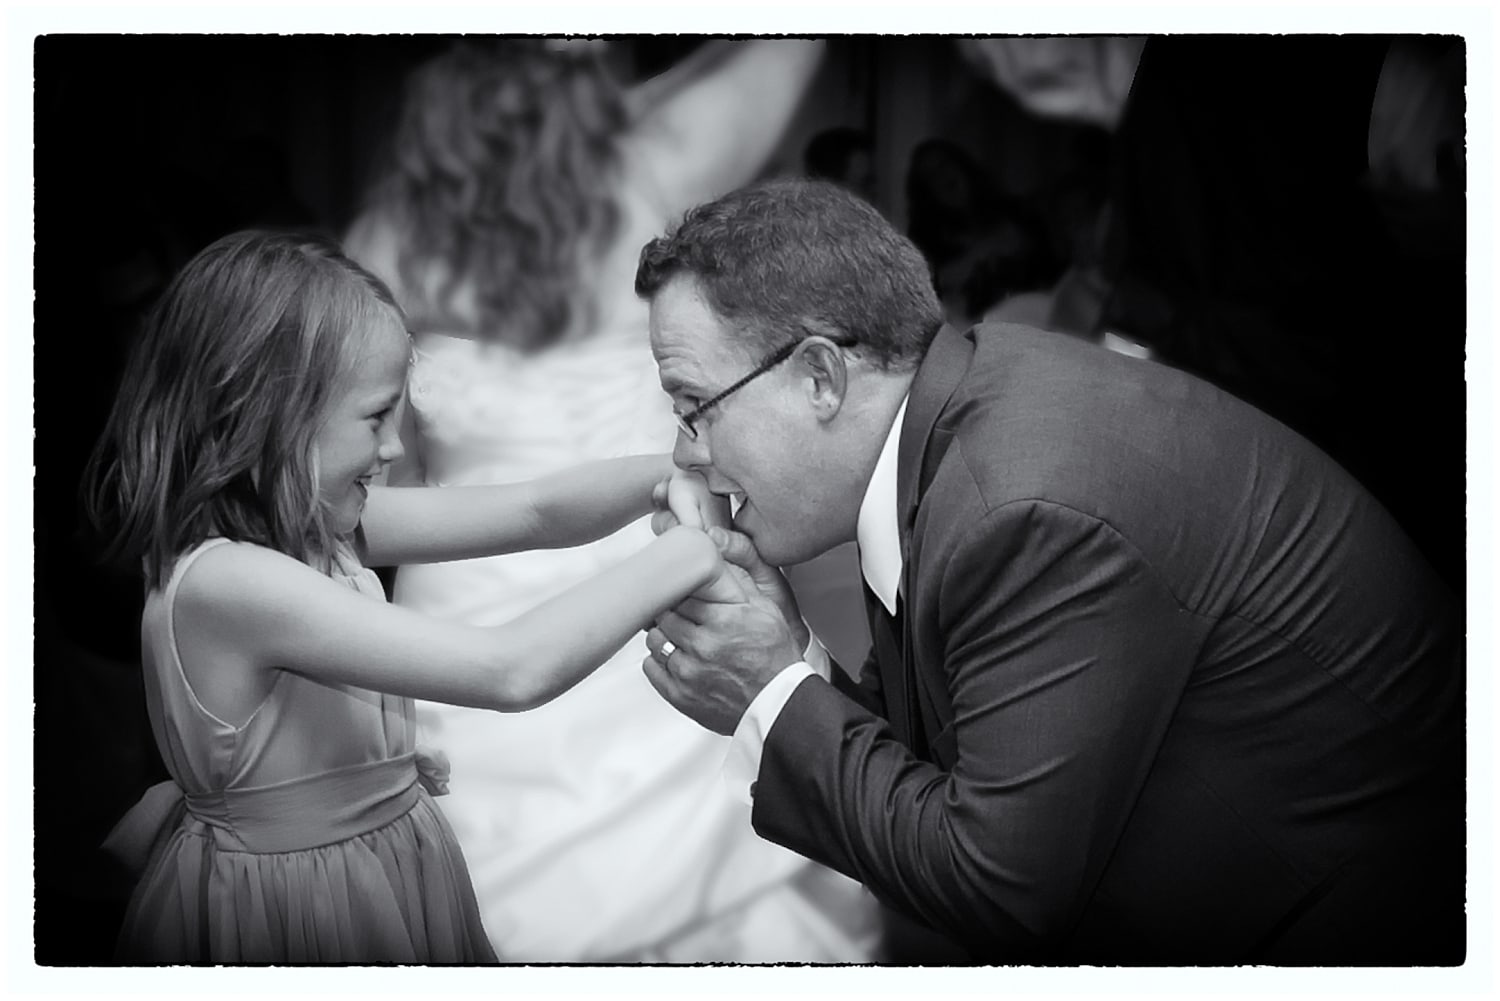 The groom dances with his daughter during his wedding reception at the Ashburn Golf Club in Halifax, NS.